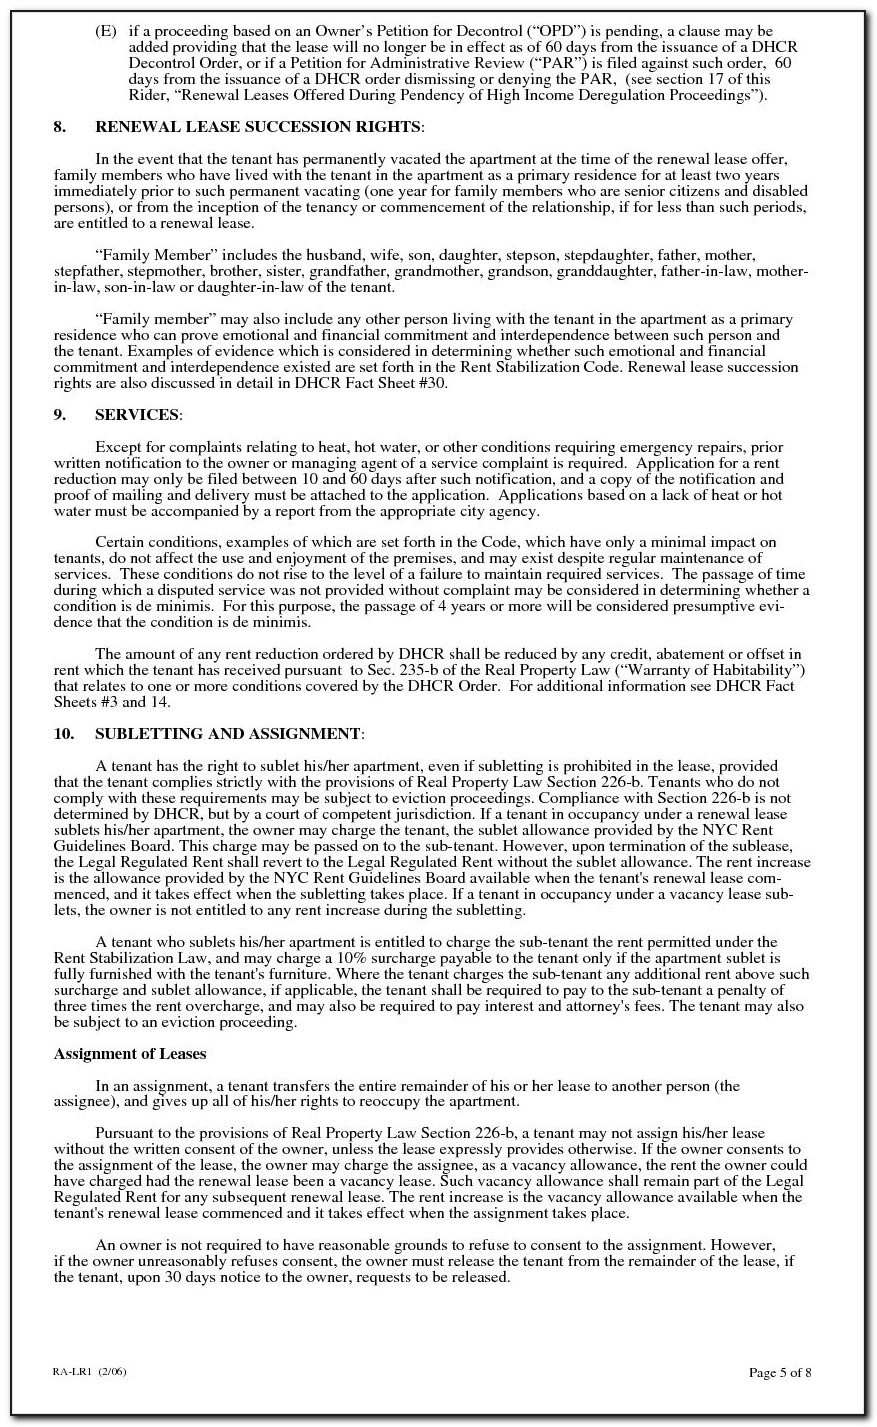 Band Contract Template Pdf